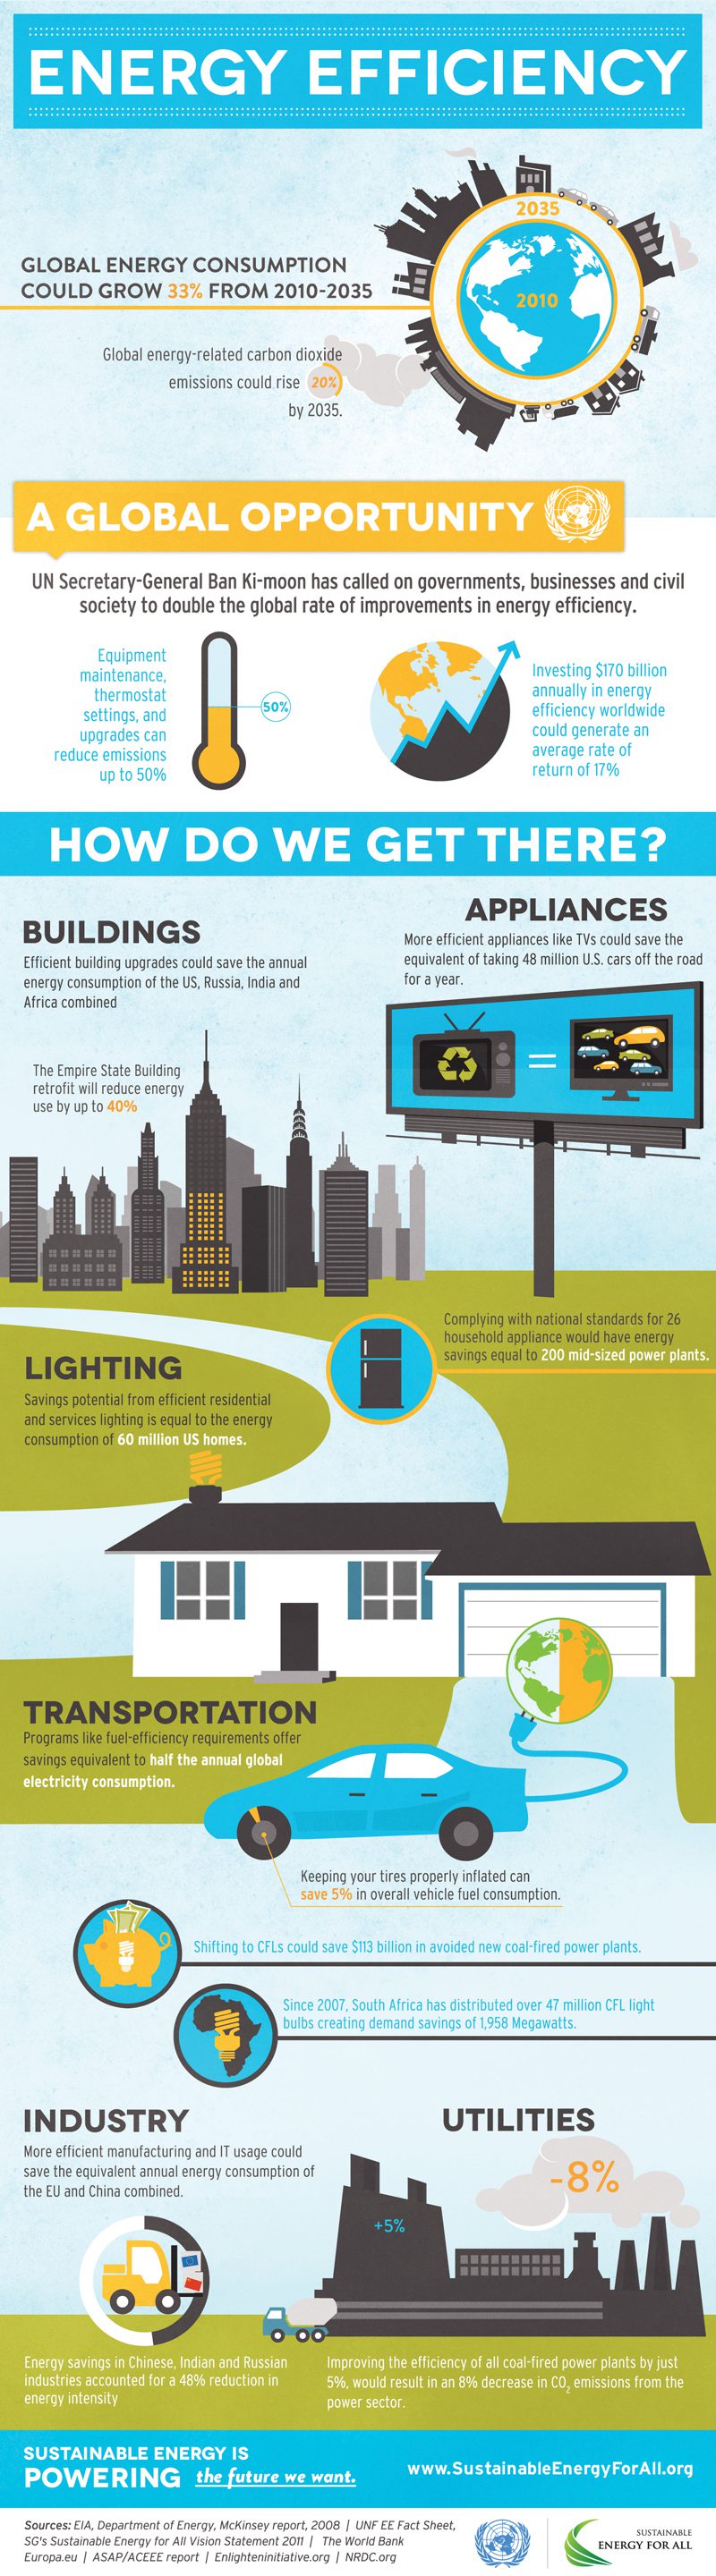 Energy Efficiency Facts